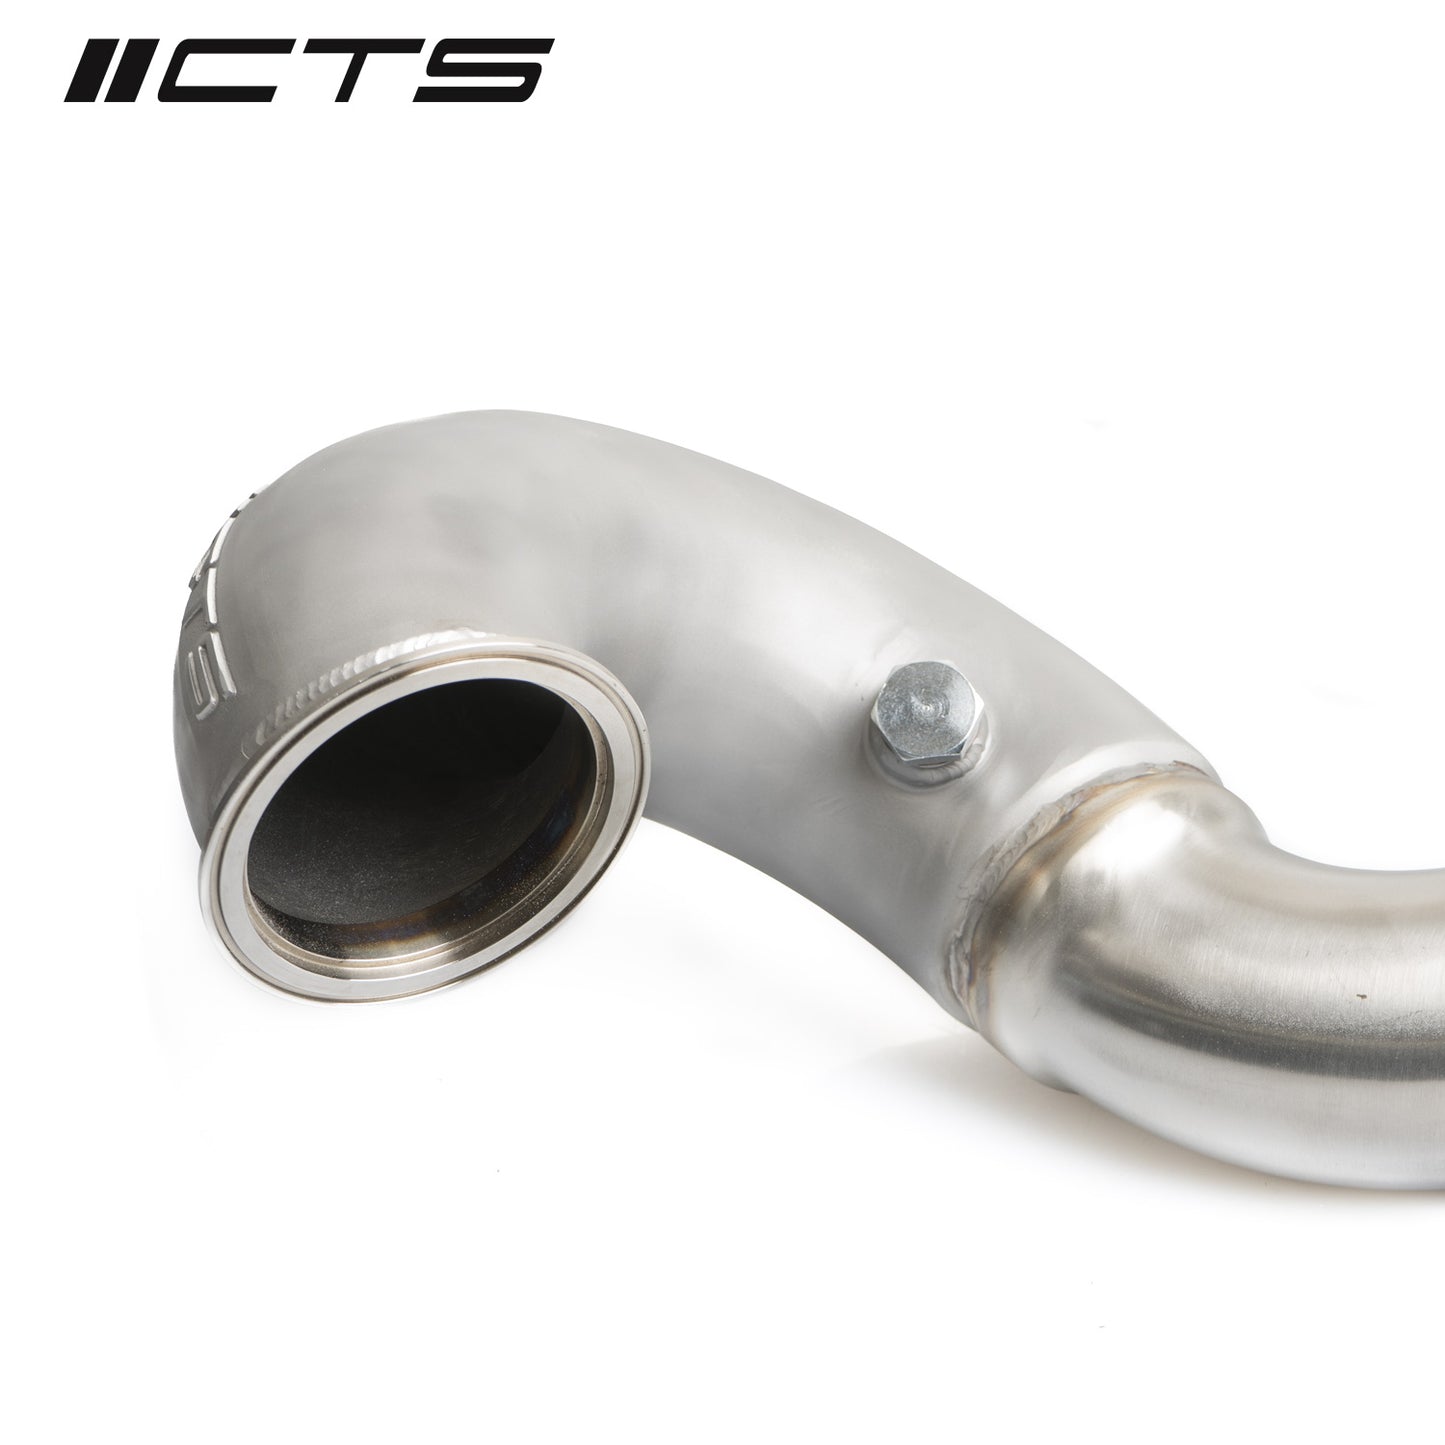 CTS High Flow Catted 3.5" Downpipe (FWD) - VW Golf GTI MK7/7.5